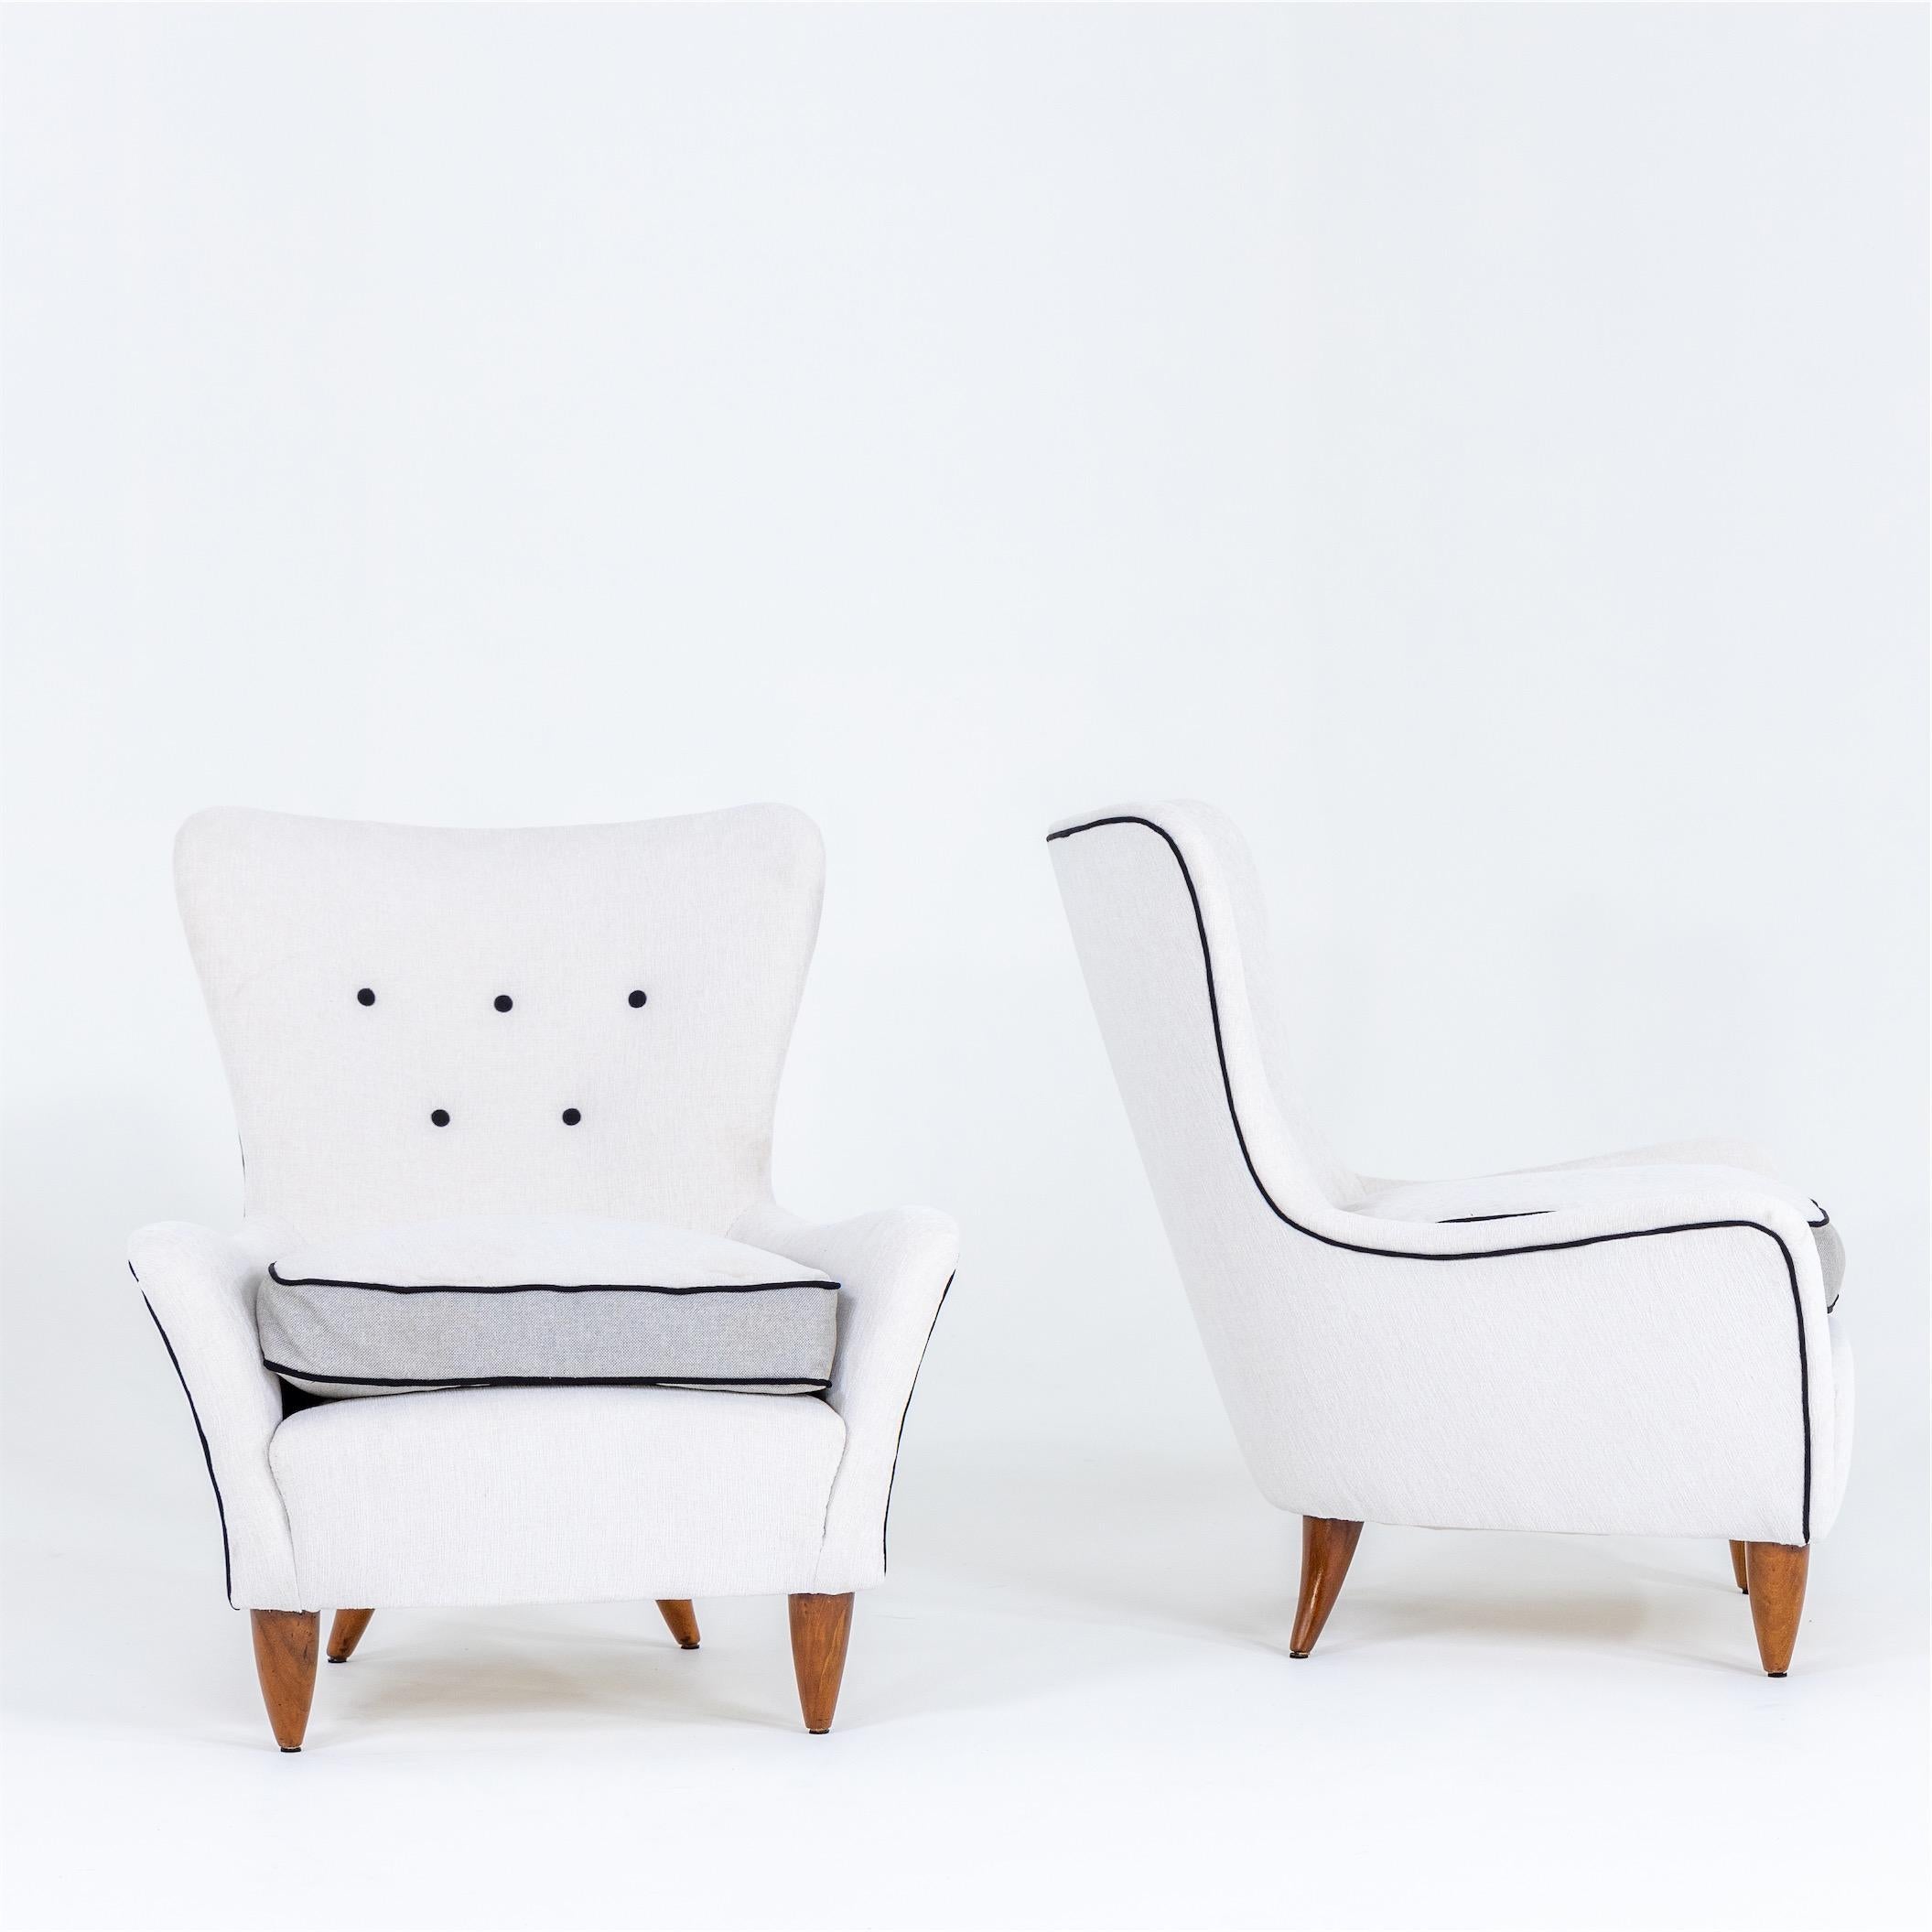 Mid-Century Modern Lounge Chairs by Brambilla, Italy, 1950s For Sale